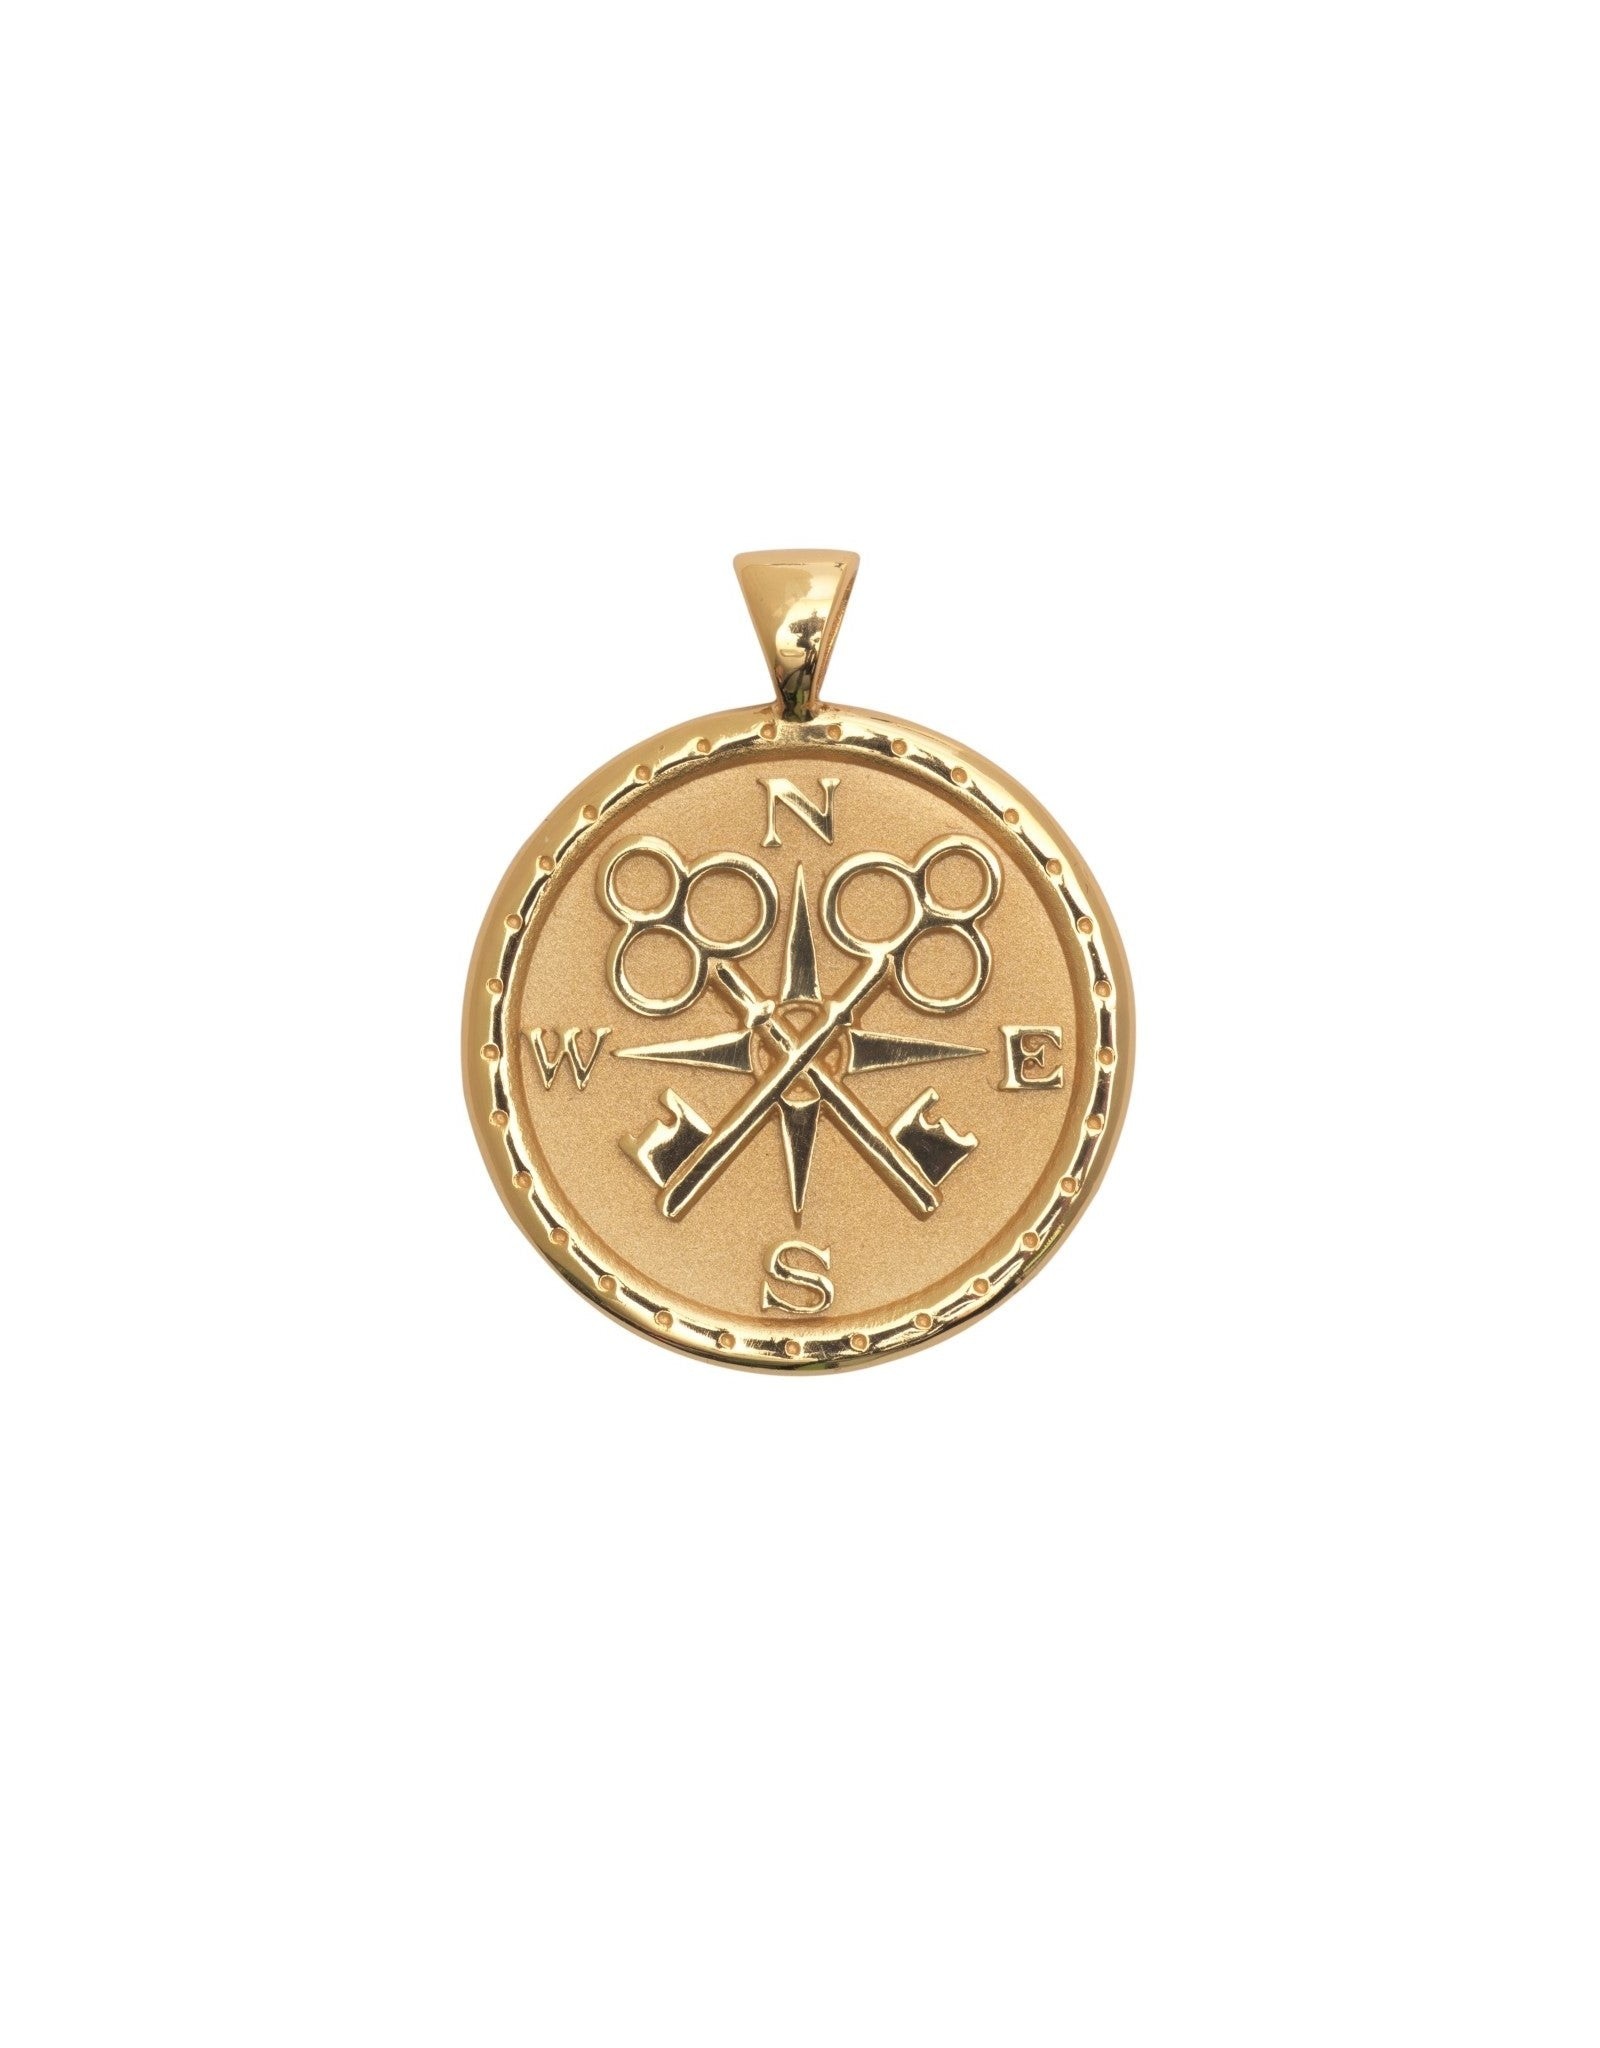 Jane Win Jane Win Coin Pendents